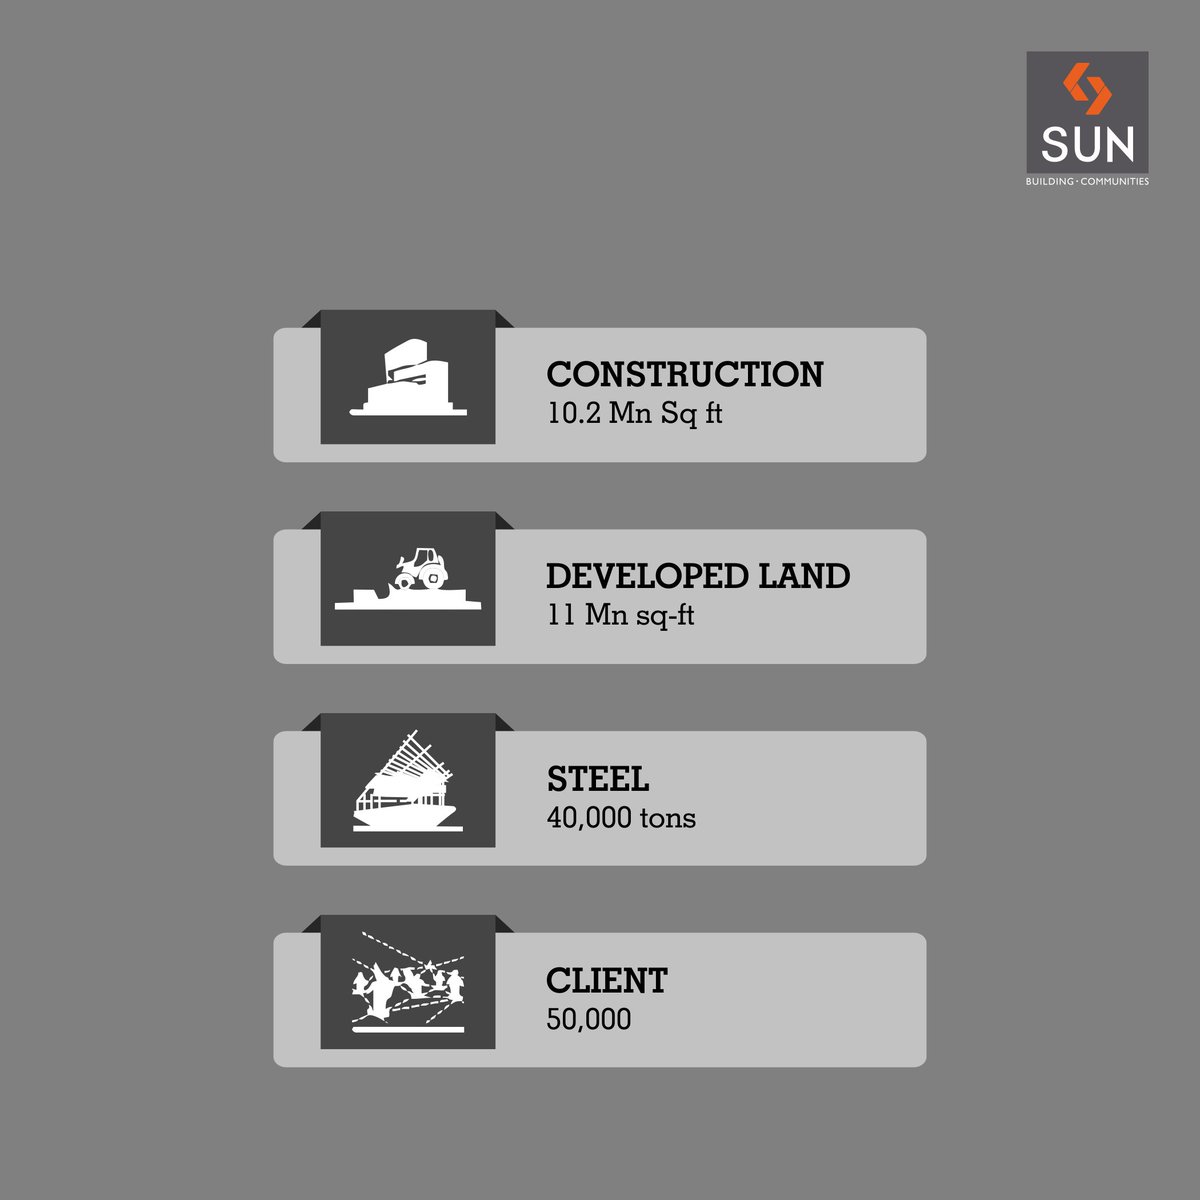 #SunBuildersGroup 
Climbing the steps of achievements and forging ahead with the support of happy customers. https://t.co/UlAVP8RHmy